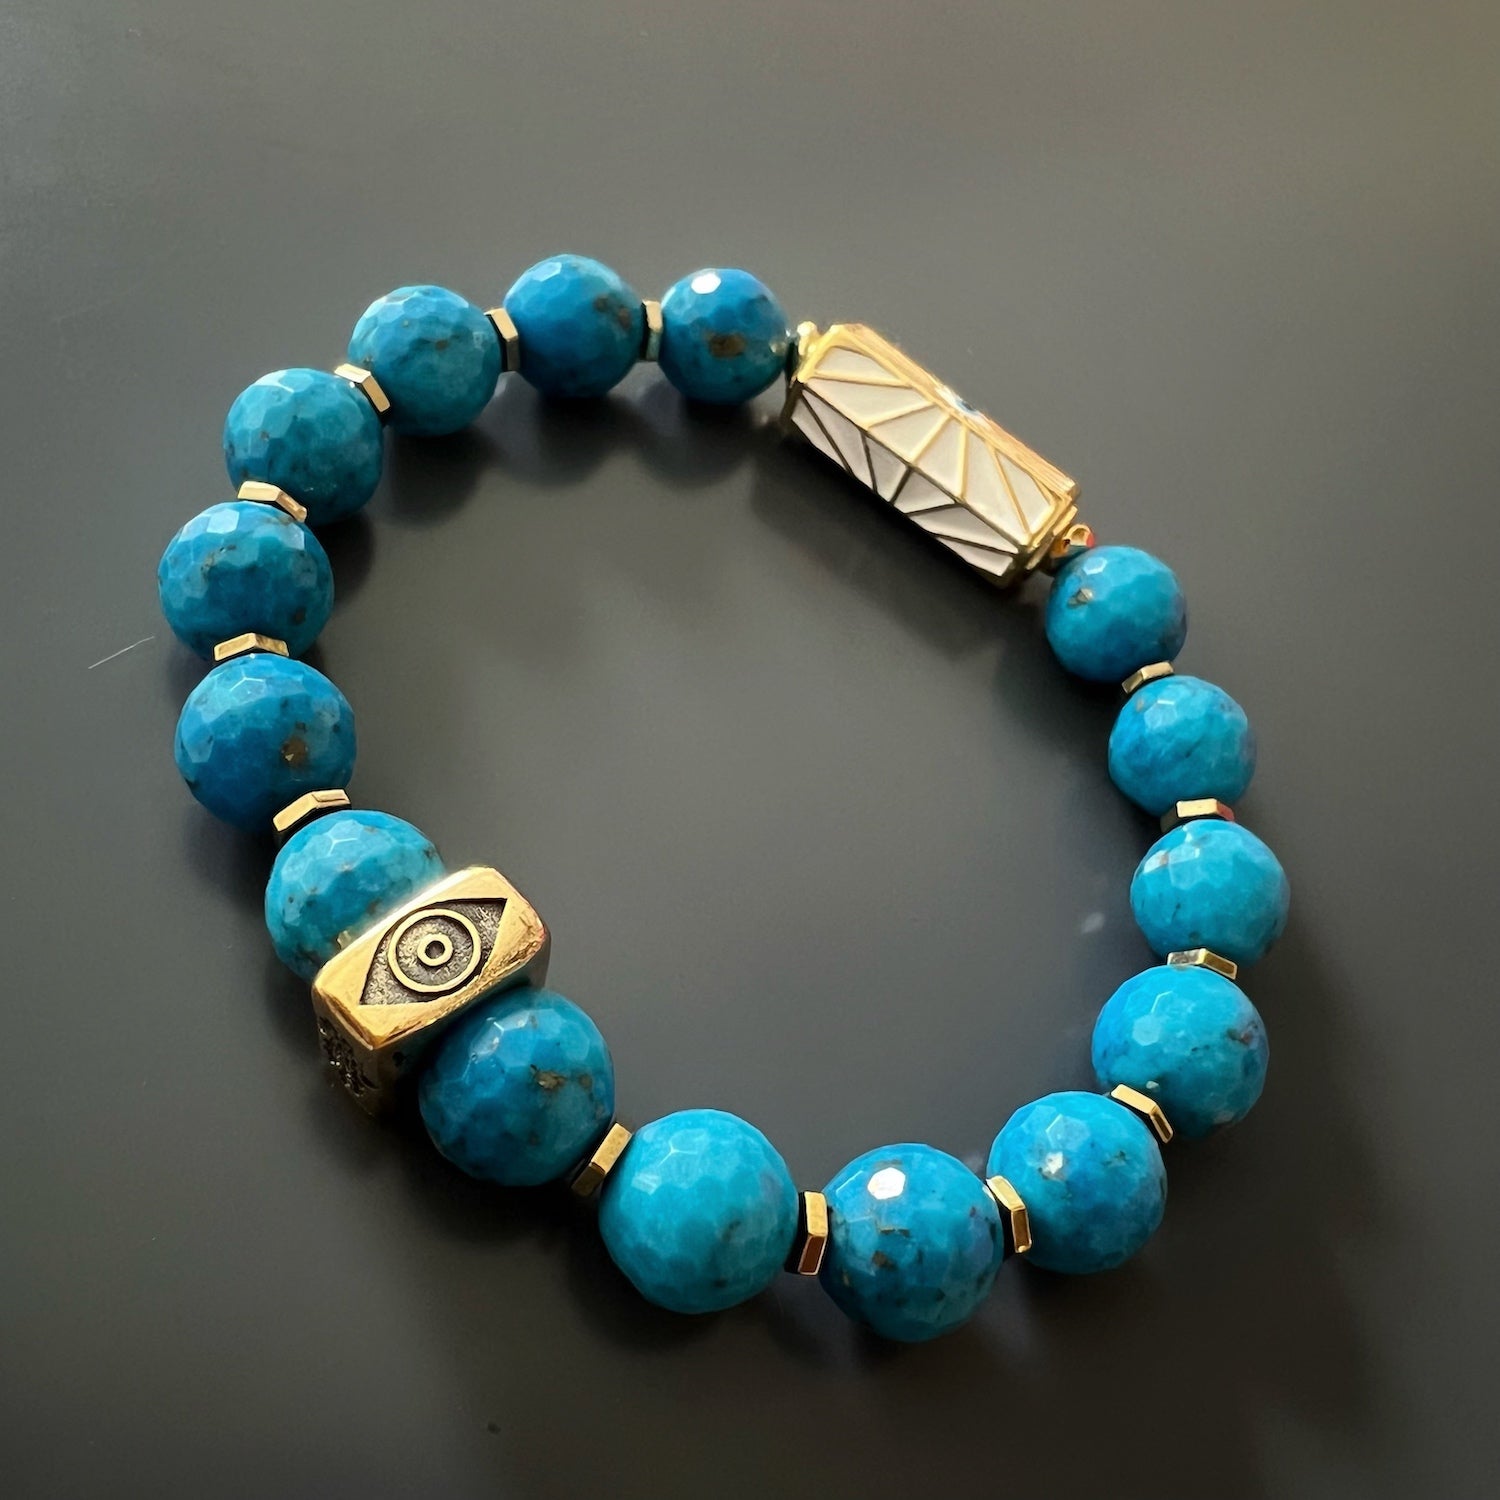 The Turquoise Luck and Protection Bracelet combines spirituality and style, making it a perfect addition to your jewelry collection.